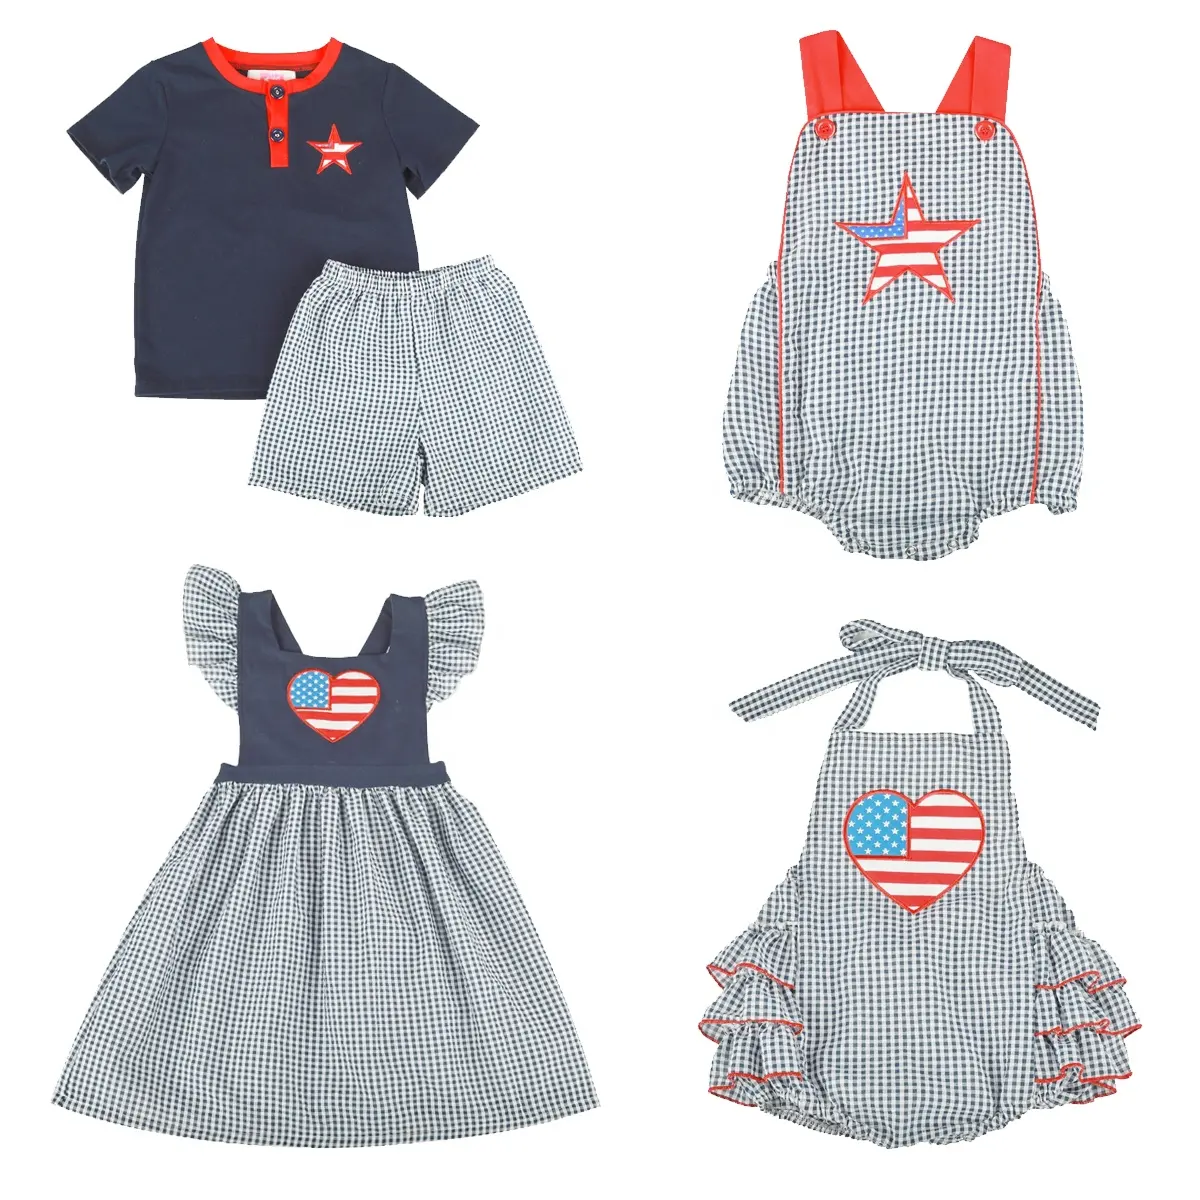 High quality 4th of July Kids Clothing Children Patriotic Appliqued Siblings Set Smocked Dress for Baby Girls